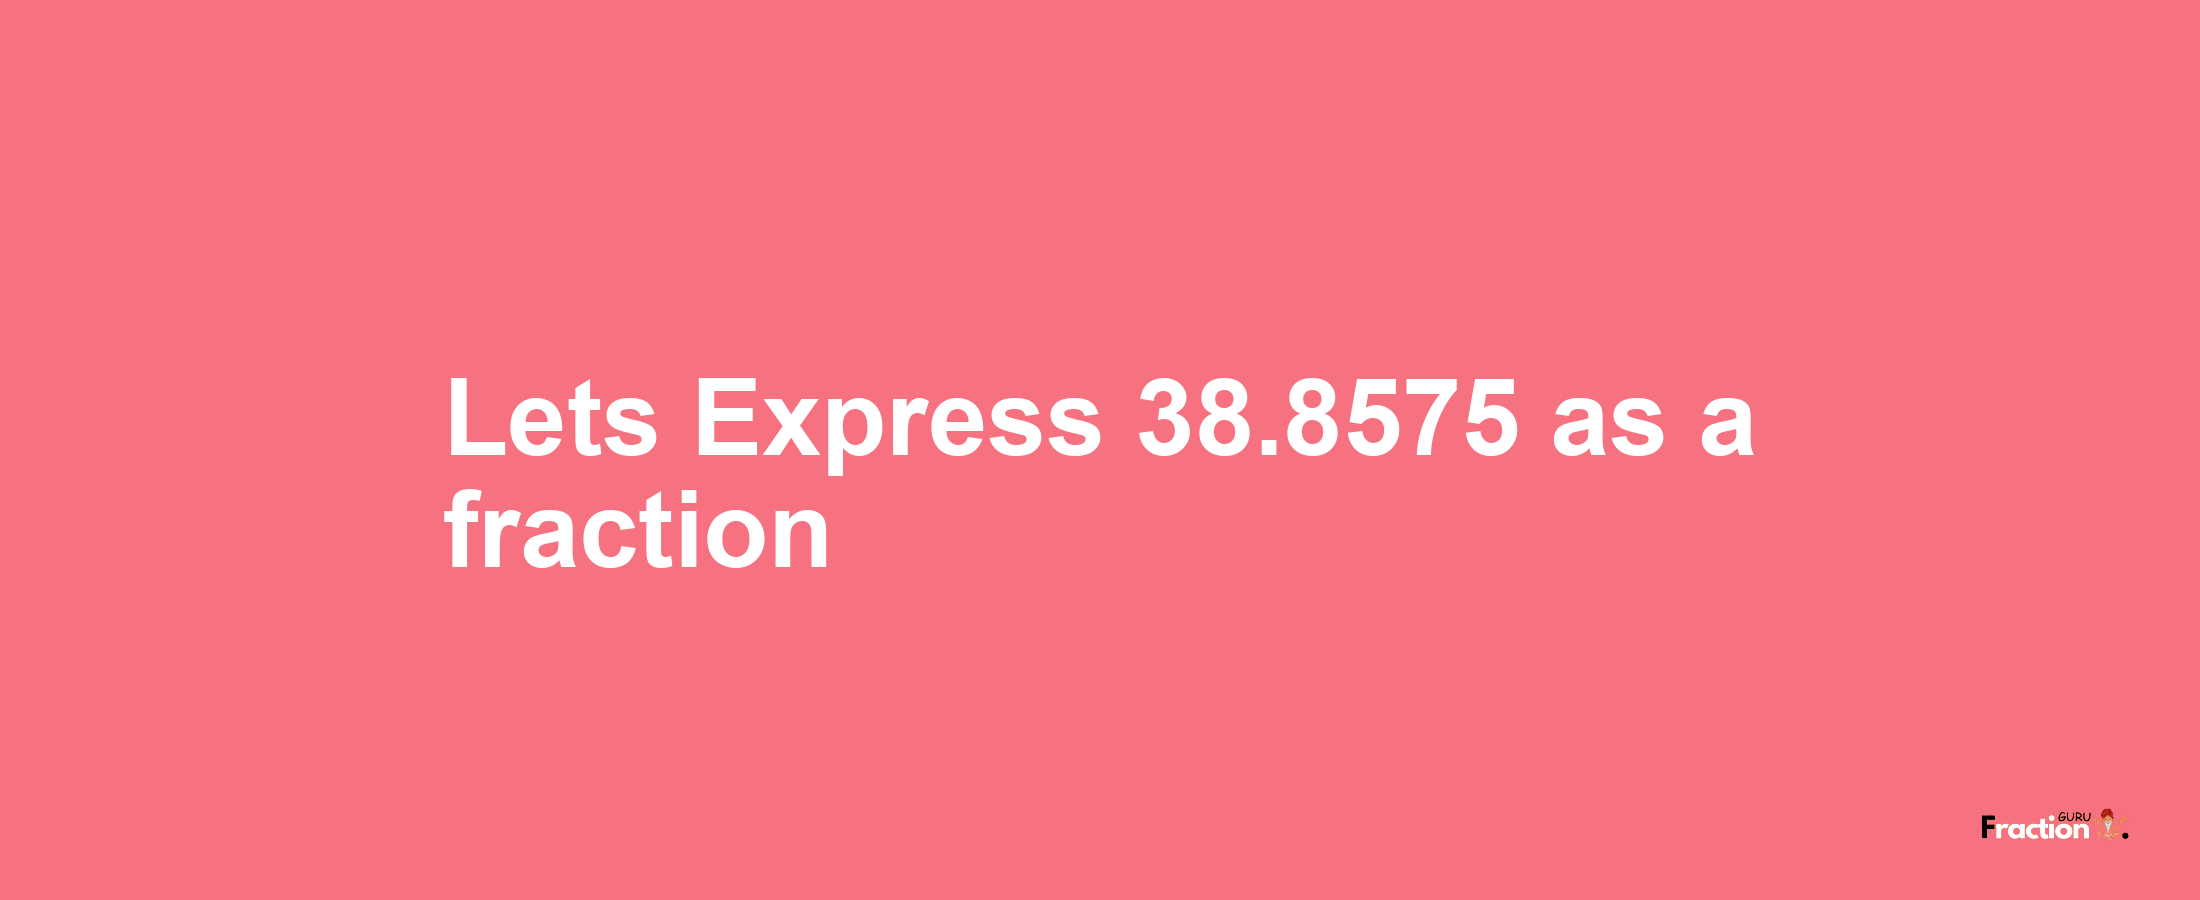 Lets Express 38.8575 as afraction